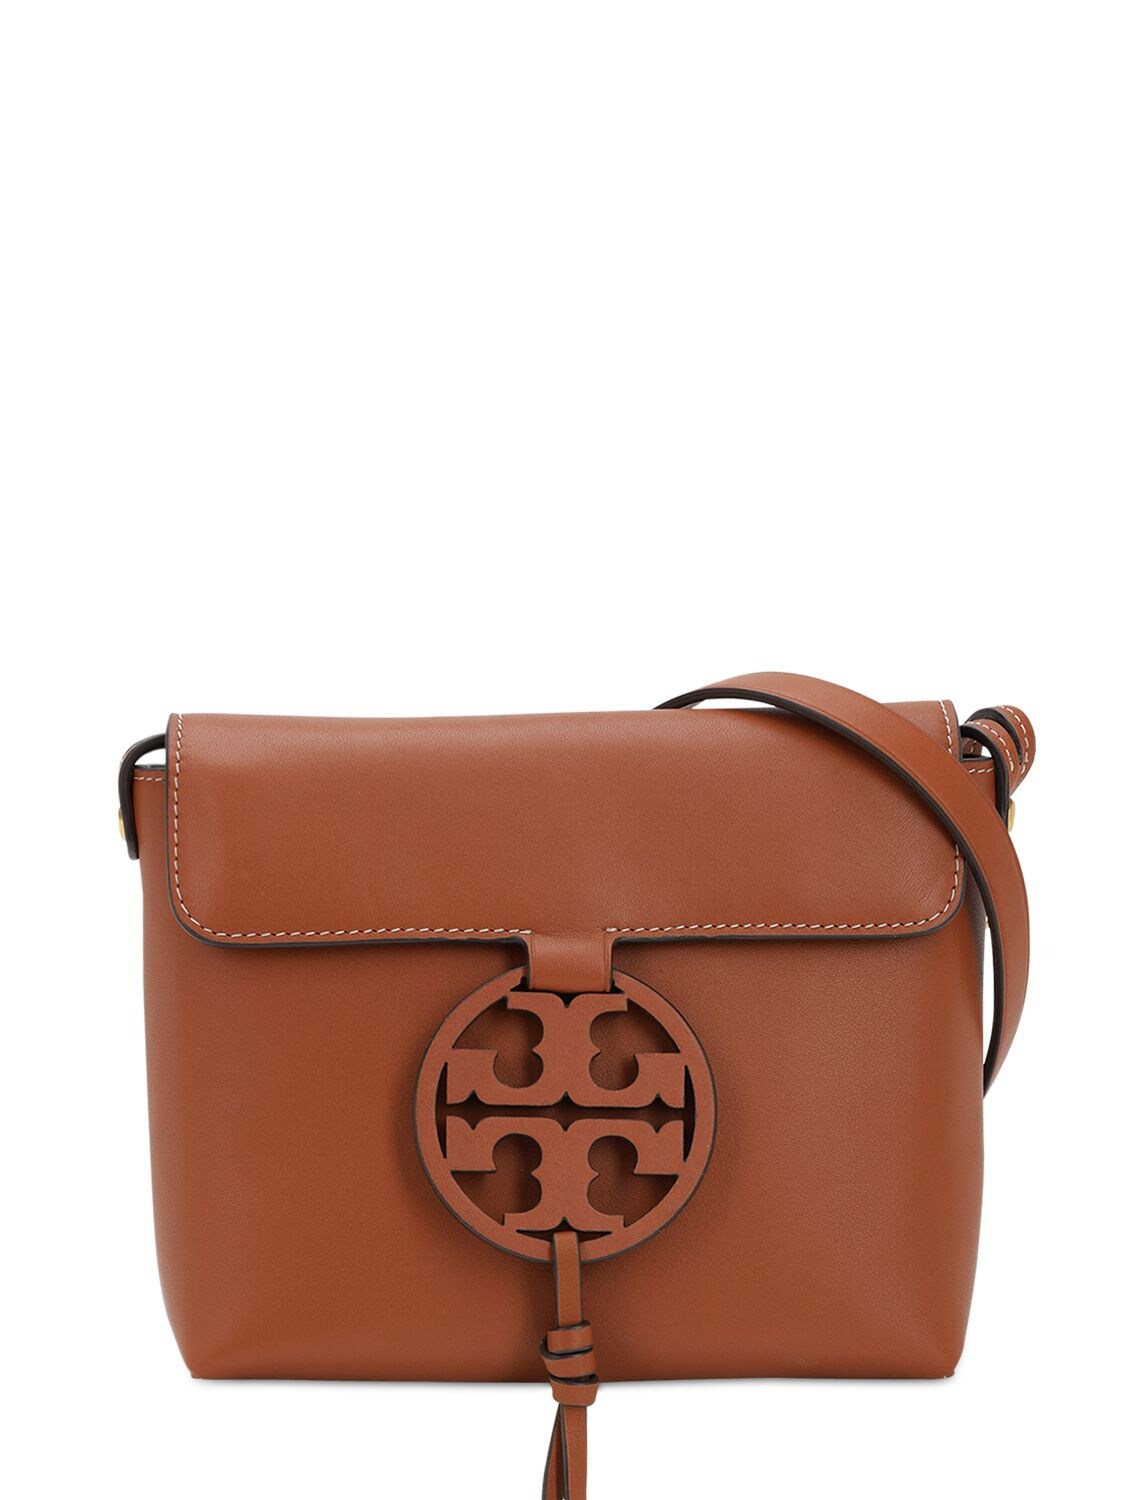 Tory Burch Miller Leather Shoulder Bag In Cuoio | ModeSens